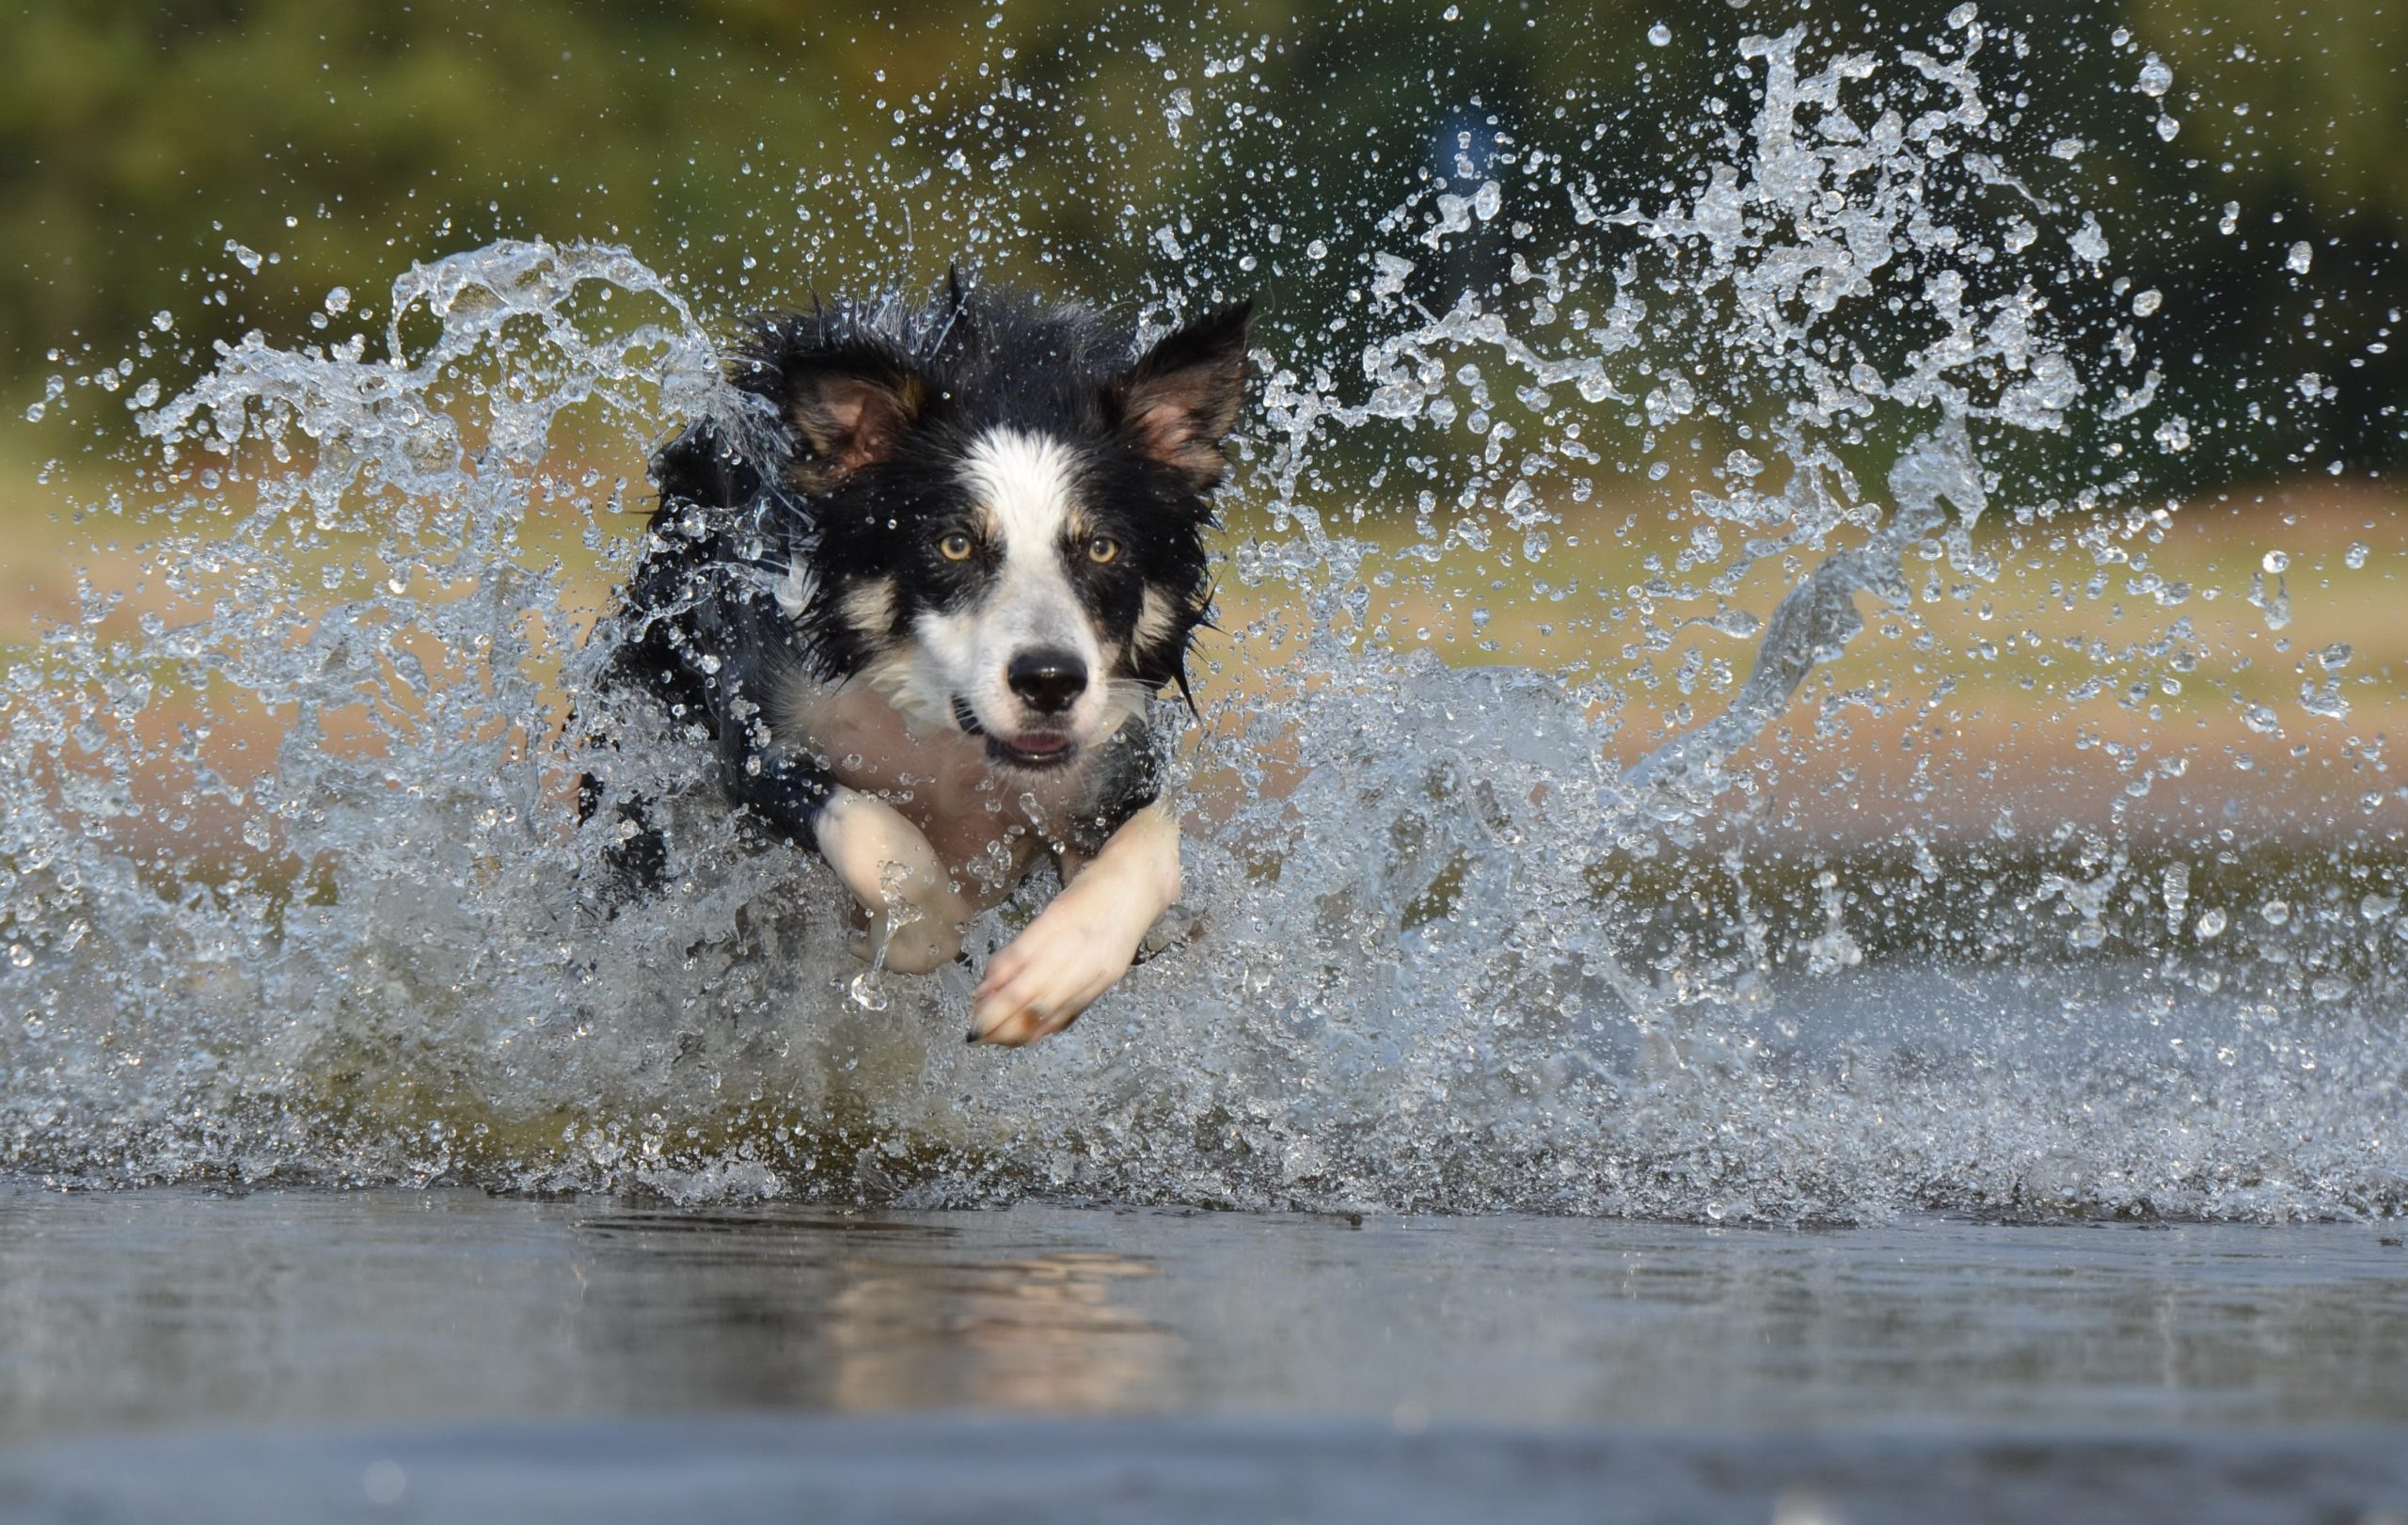 Border collie loves to play around and have plenty of energy to get rid of. Swimming is a great way for them to excercise